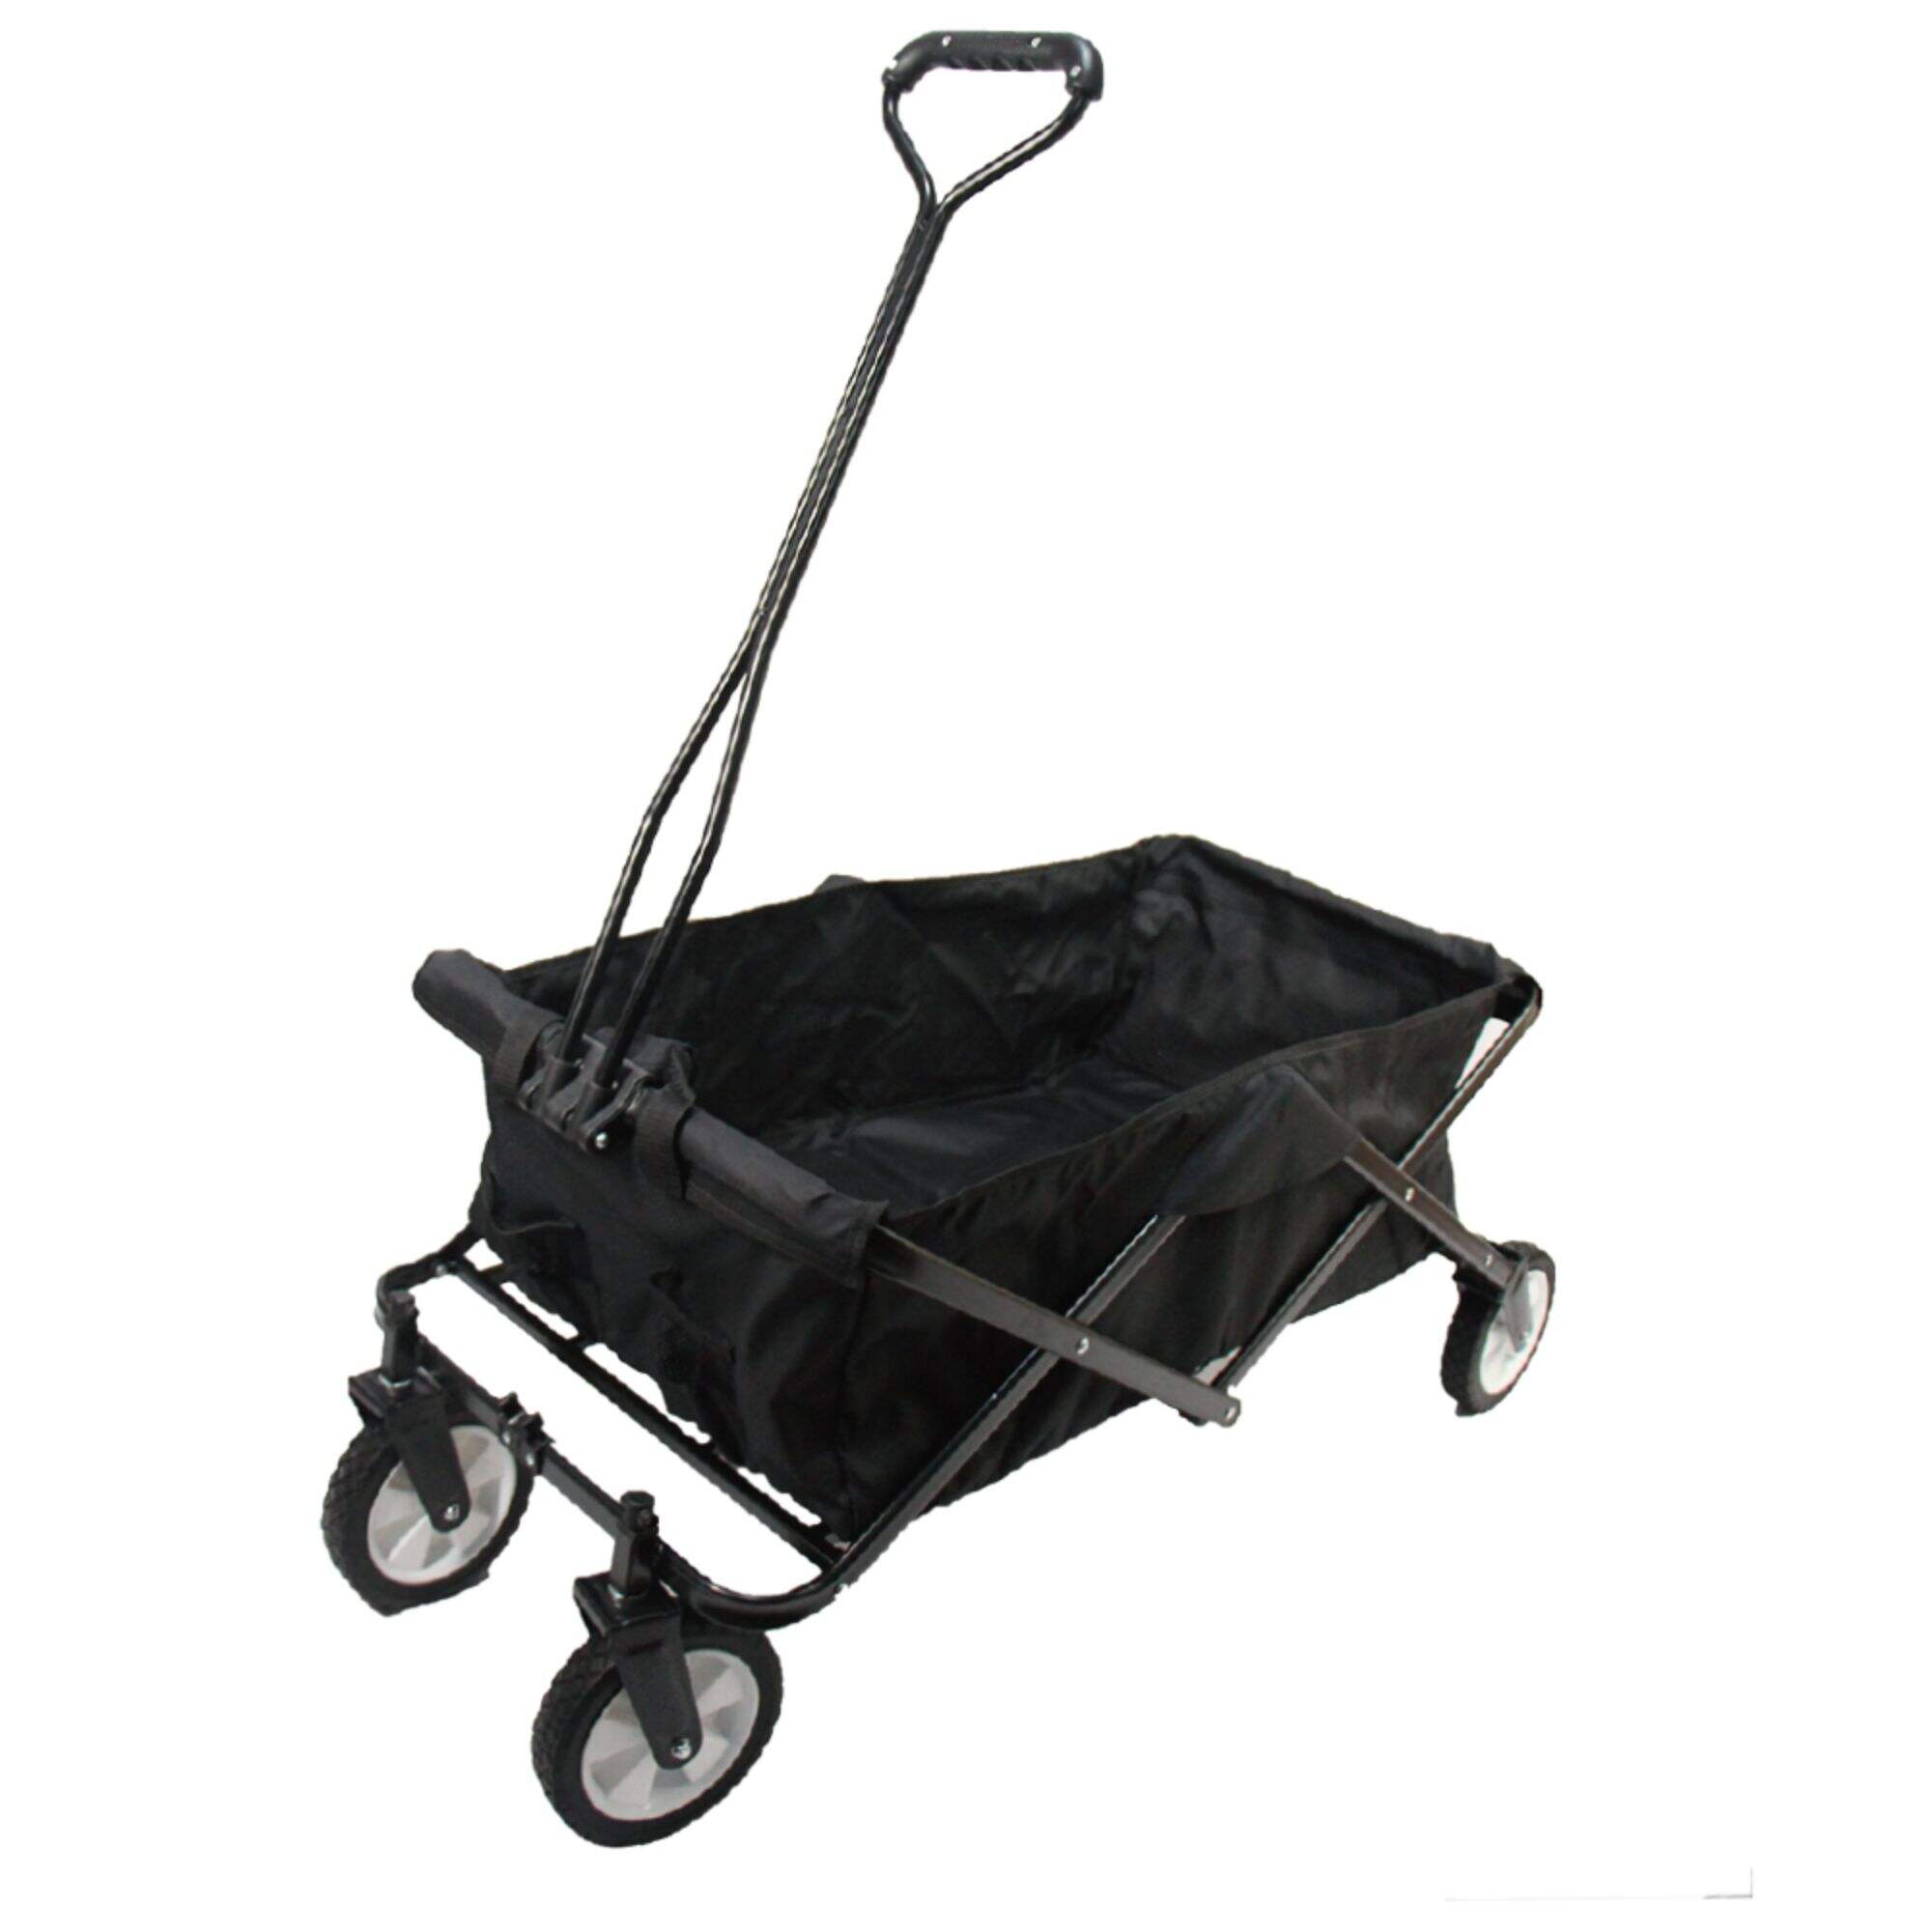 GT1808 Foldable Utility Wagons, Folding Wagon Cart for Garden, Camping, Outdoor